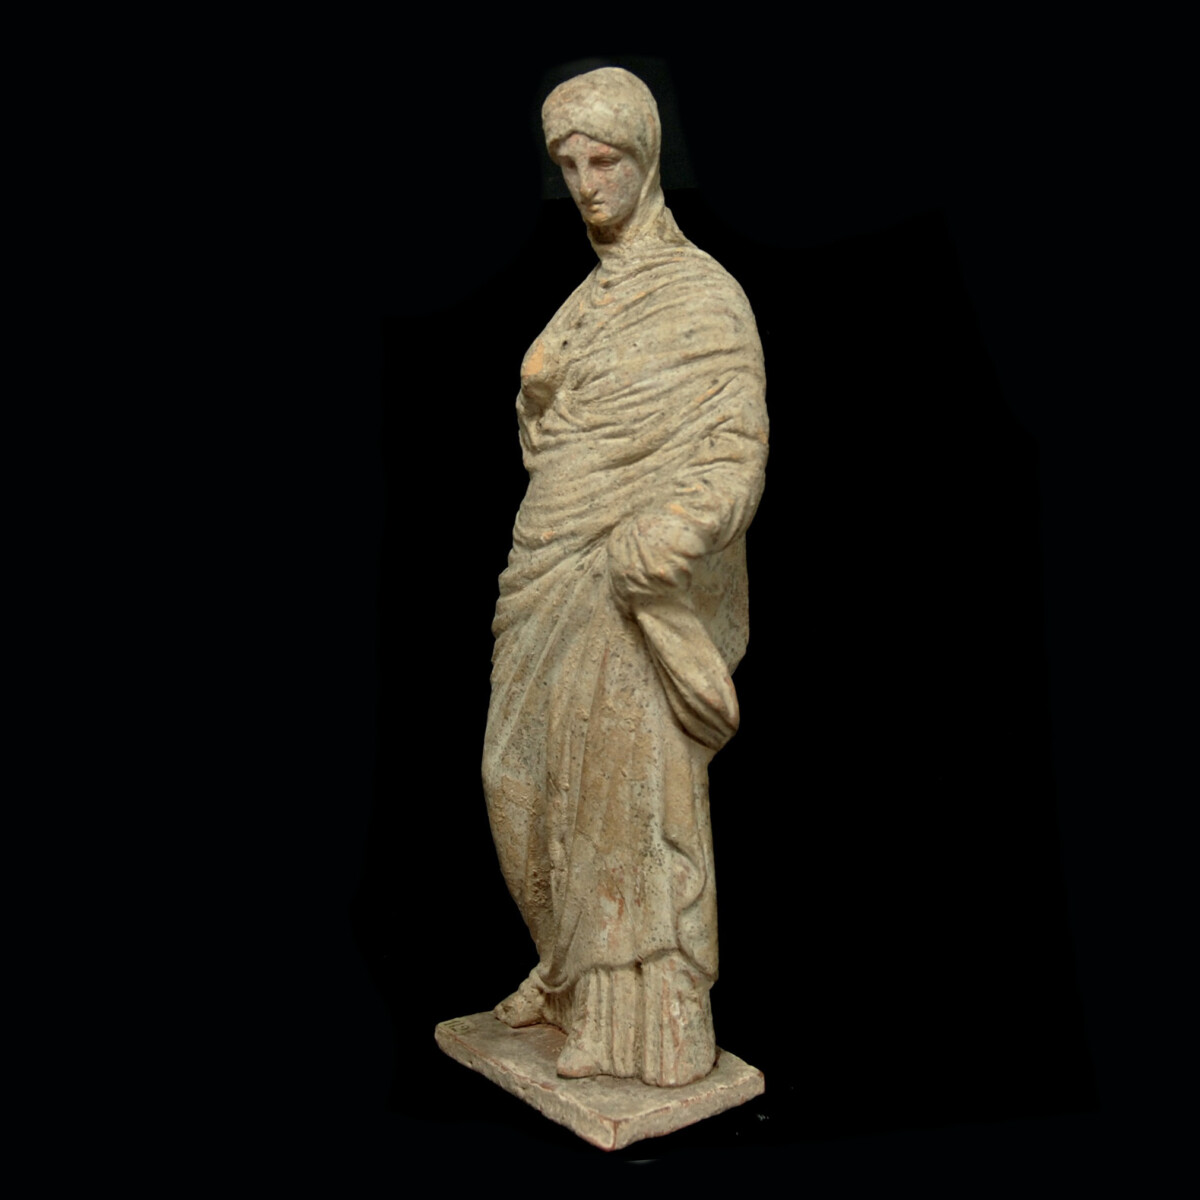 8 Tanagra statuette of a veiled woman left